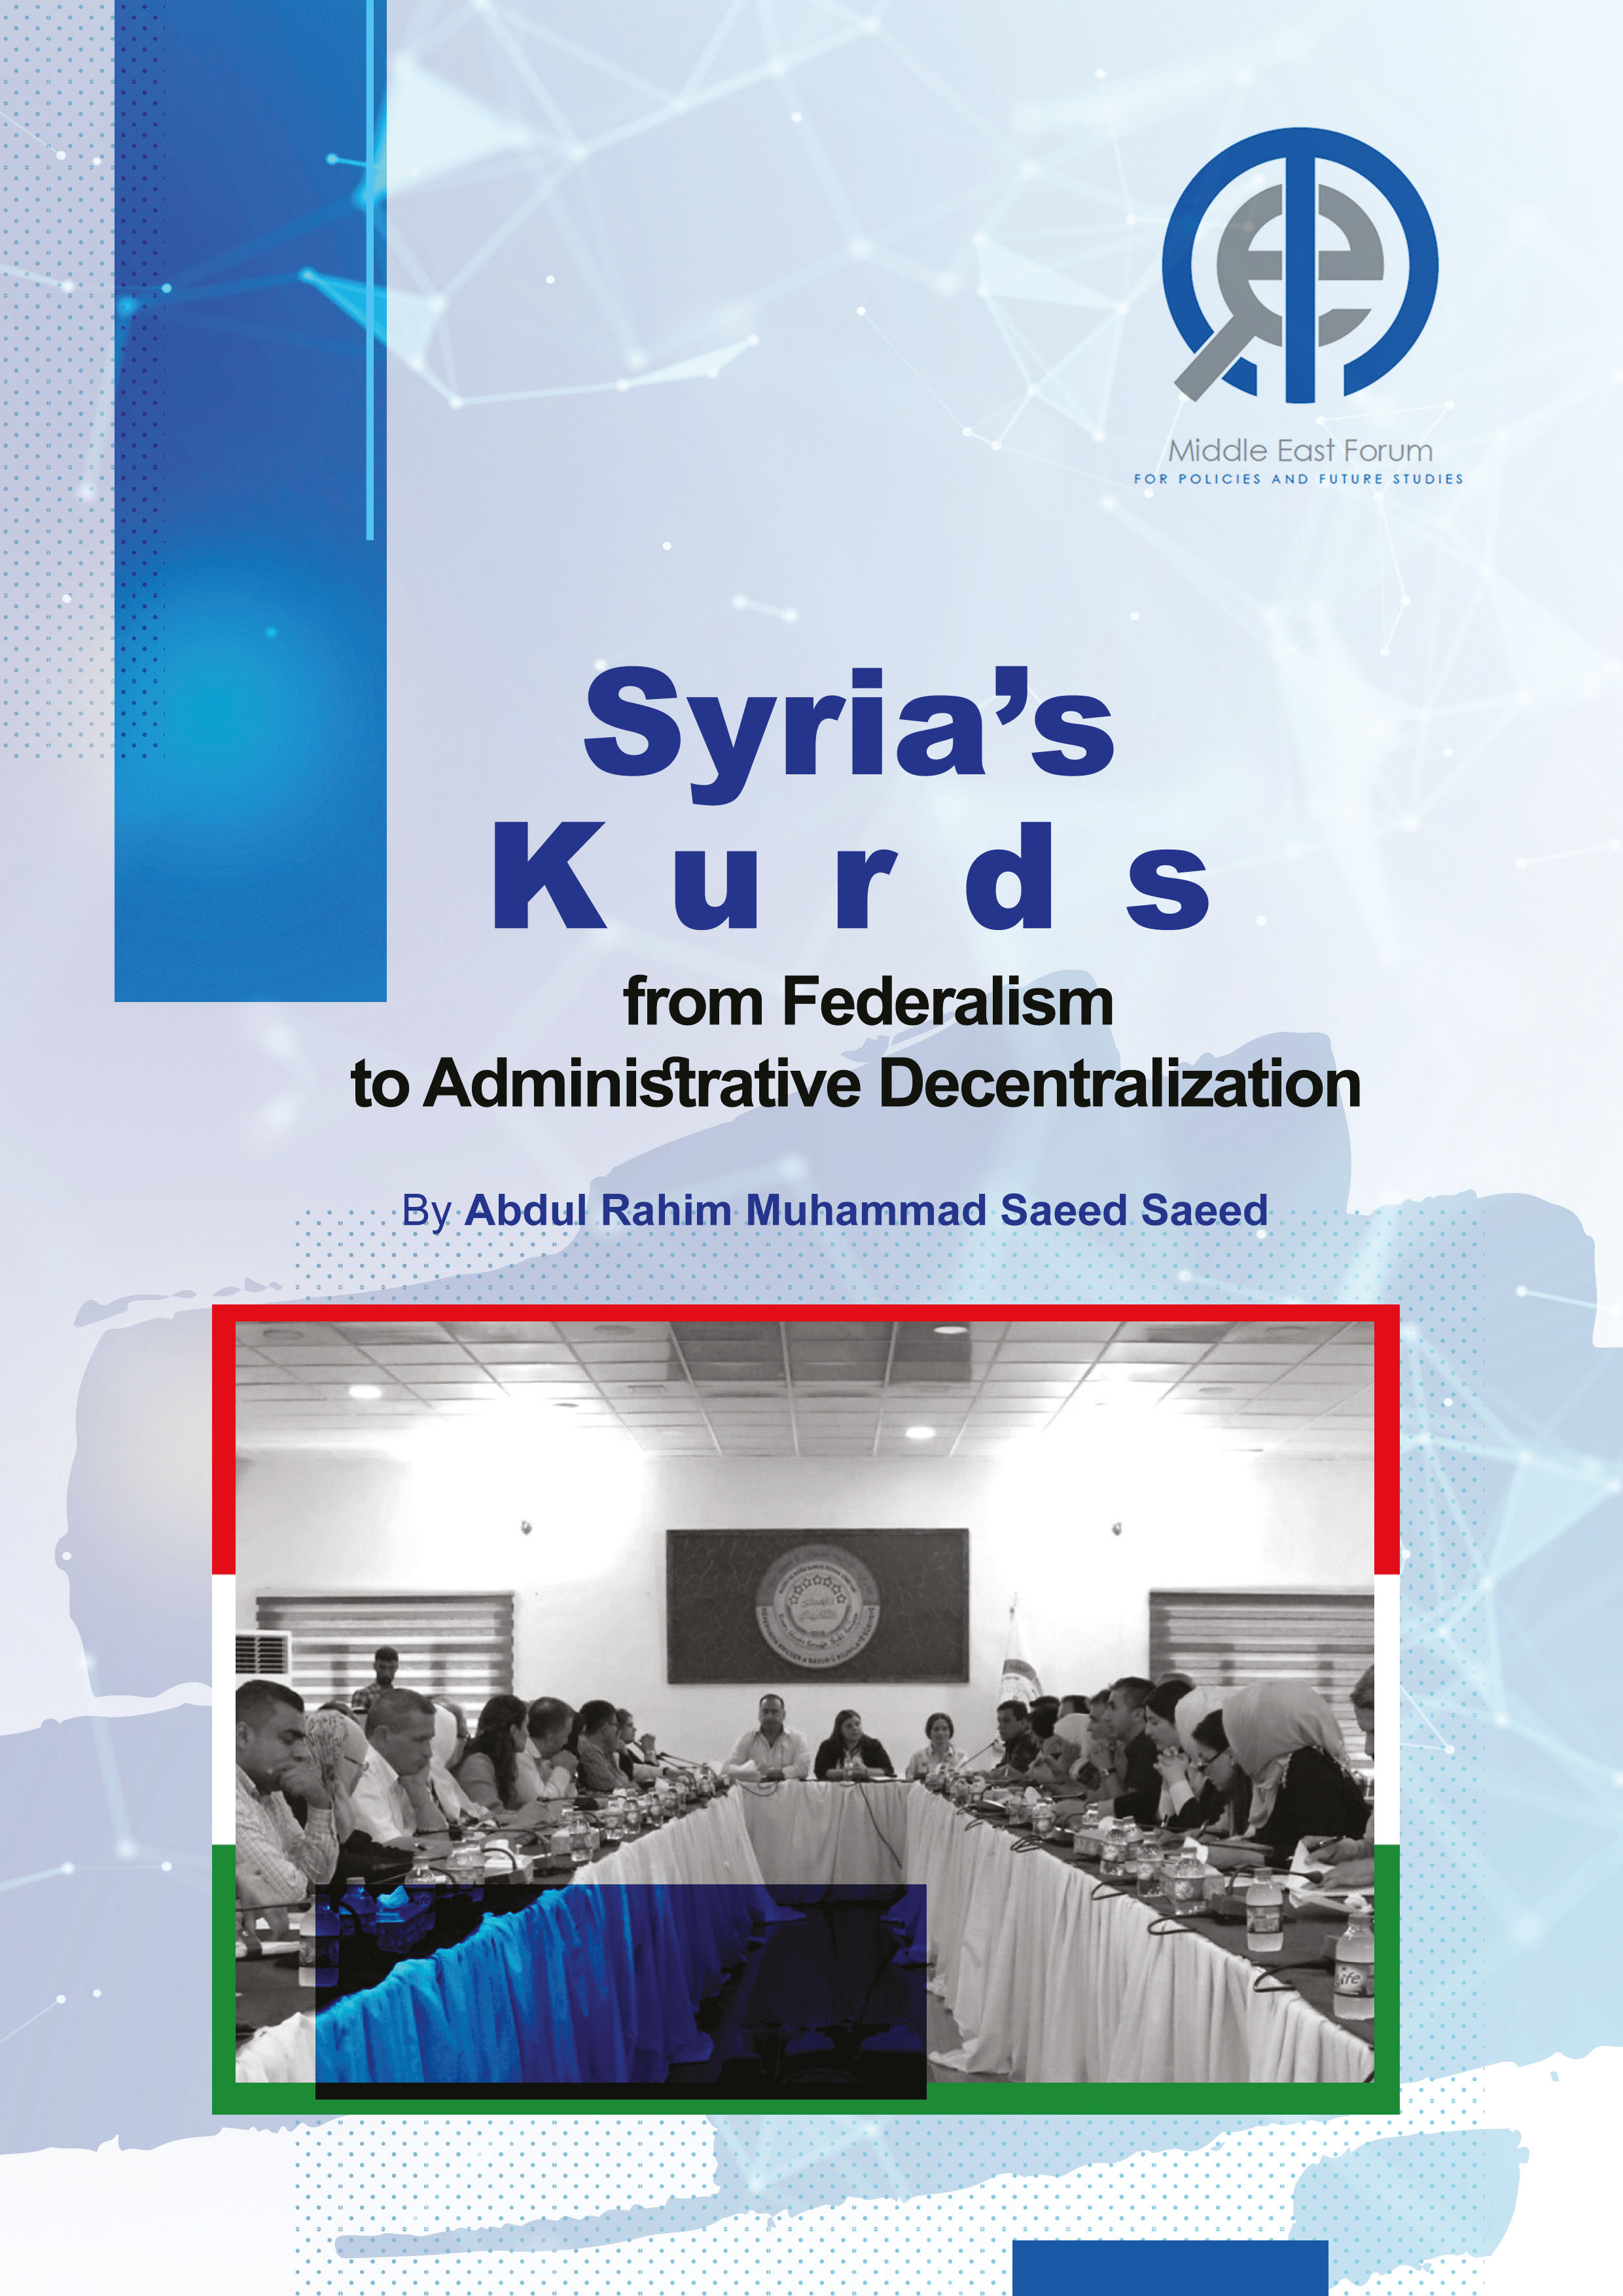 Syria’s Kurds from Federalism to Administrative Decentralization